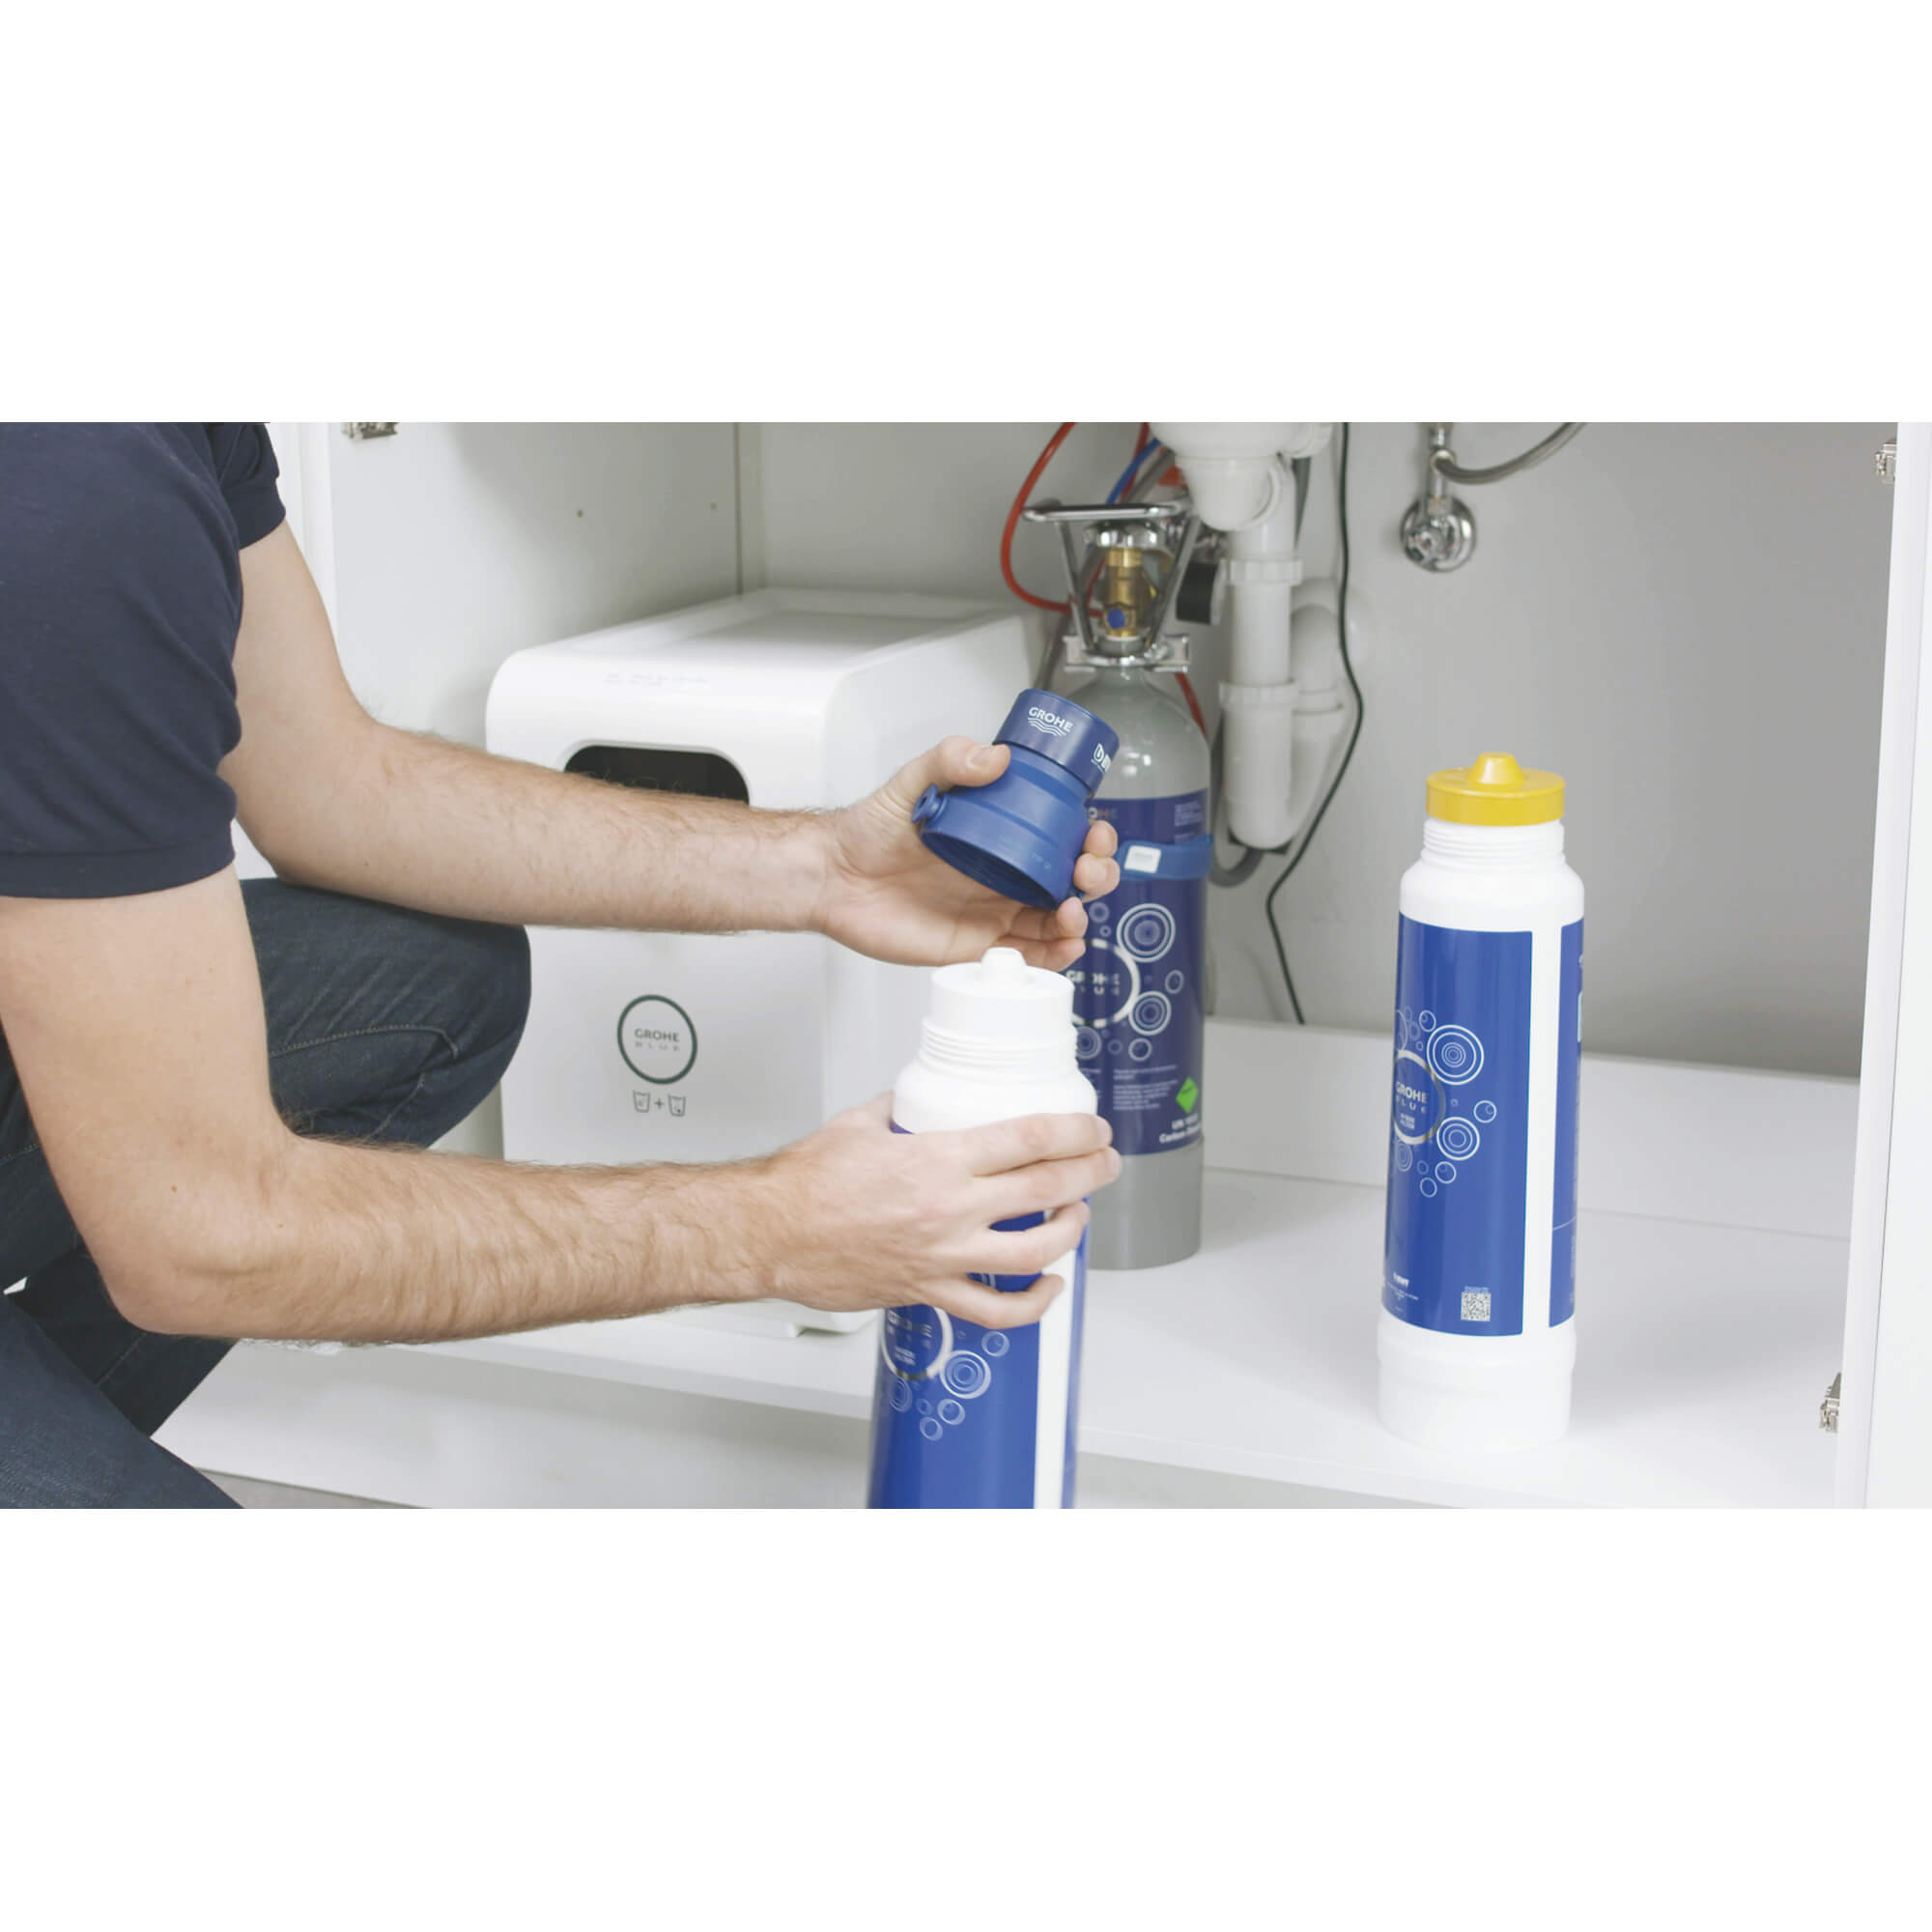 Grohe Blue Professional Filter Change 